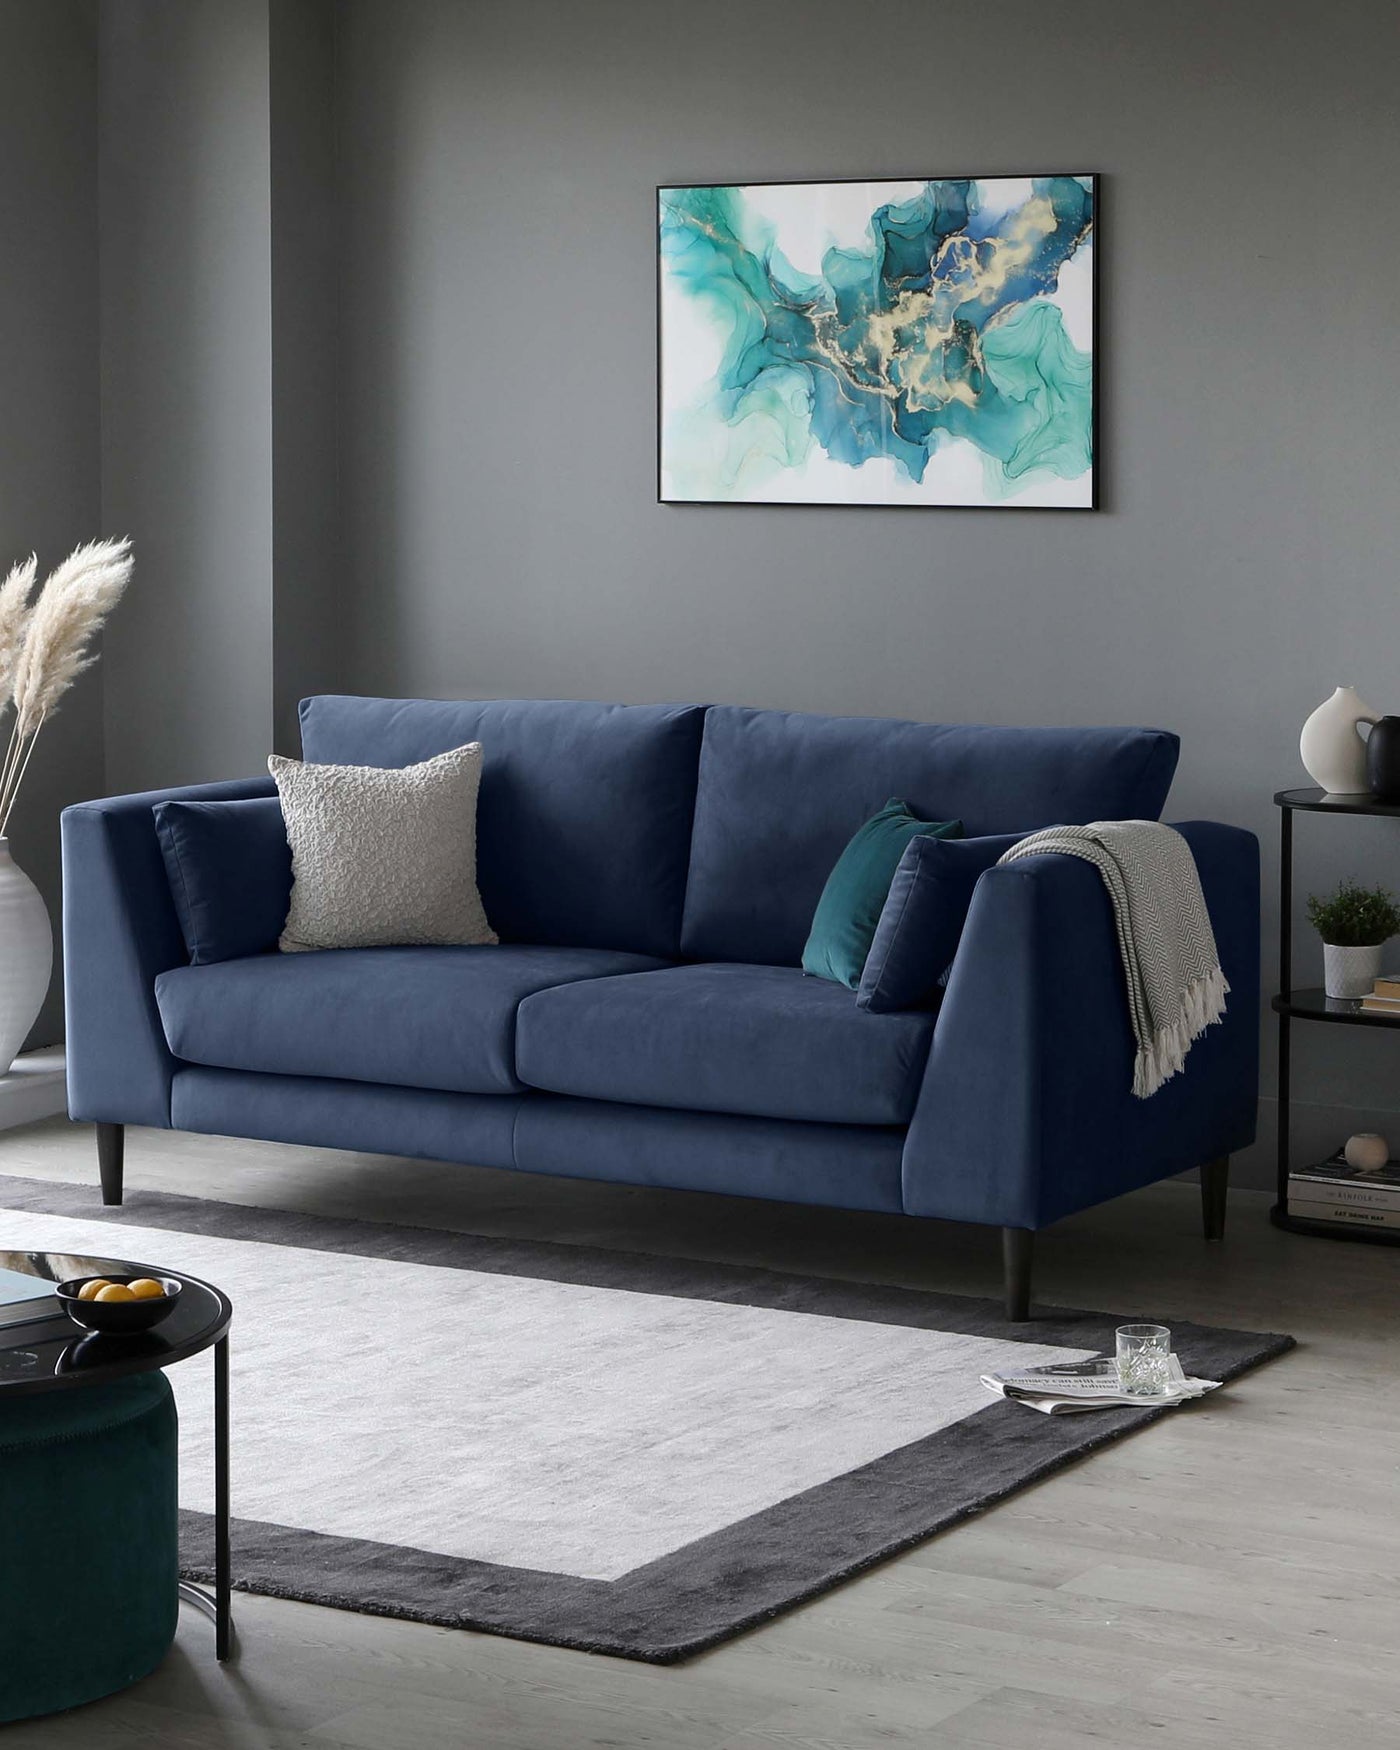 Elegant modern living room with a plush velvet three-seater sofa in a deep navy blue, featuring clean lines, tapered legs, and including assorted throw pillows in matching and contrasting colours. A dark green round velvet ottoman sits in front of the sofa, while to the right, a minimalist grey sideboard displays decorative items and a sleek white vase. The ensemble is anchored by a large two-tone geometric area rug in grey and white, complementing the room's contemporary aesthetic.